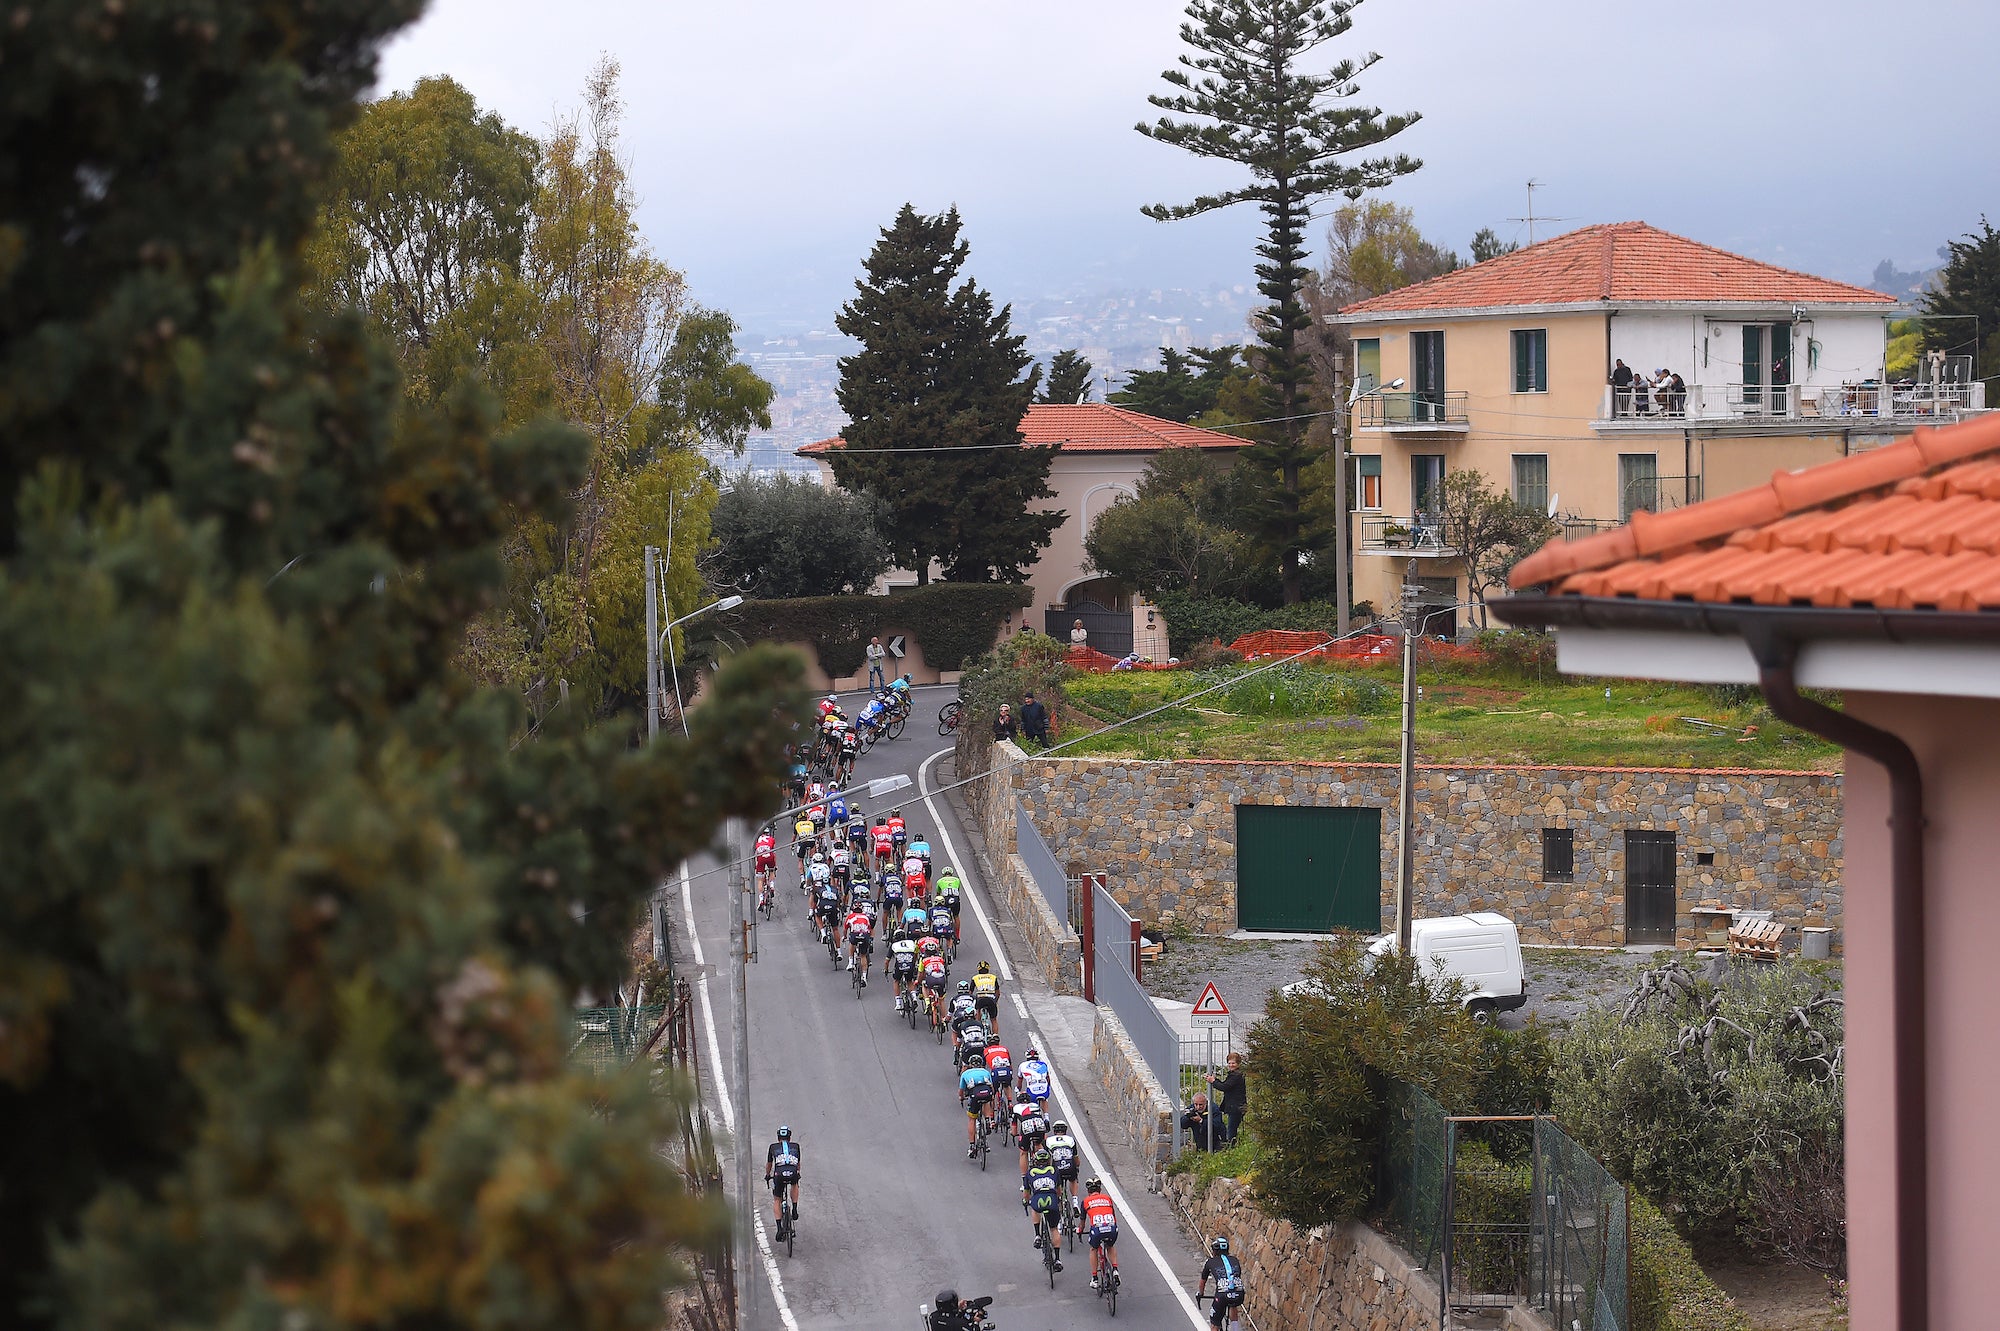 How to watch Milan-San Remo 2022 Live streaming and TV